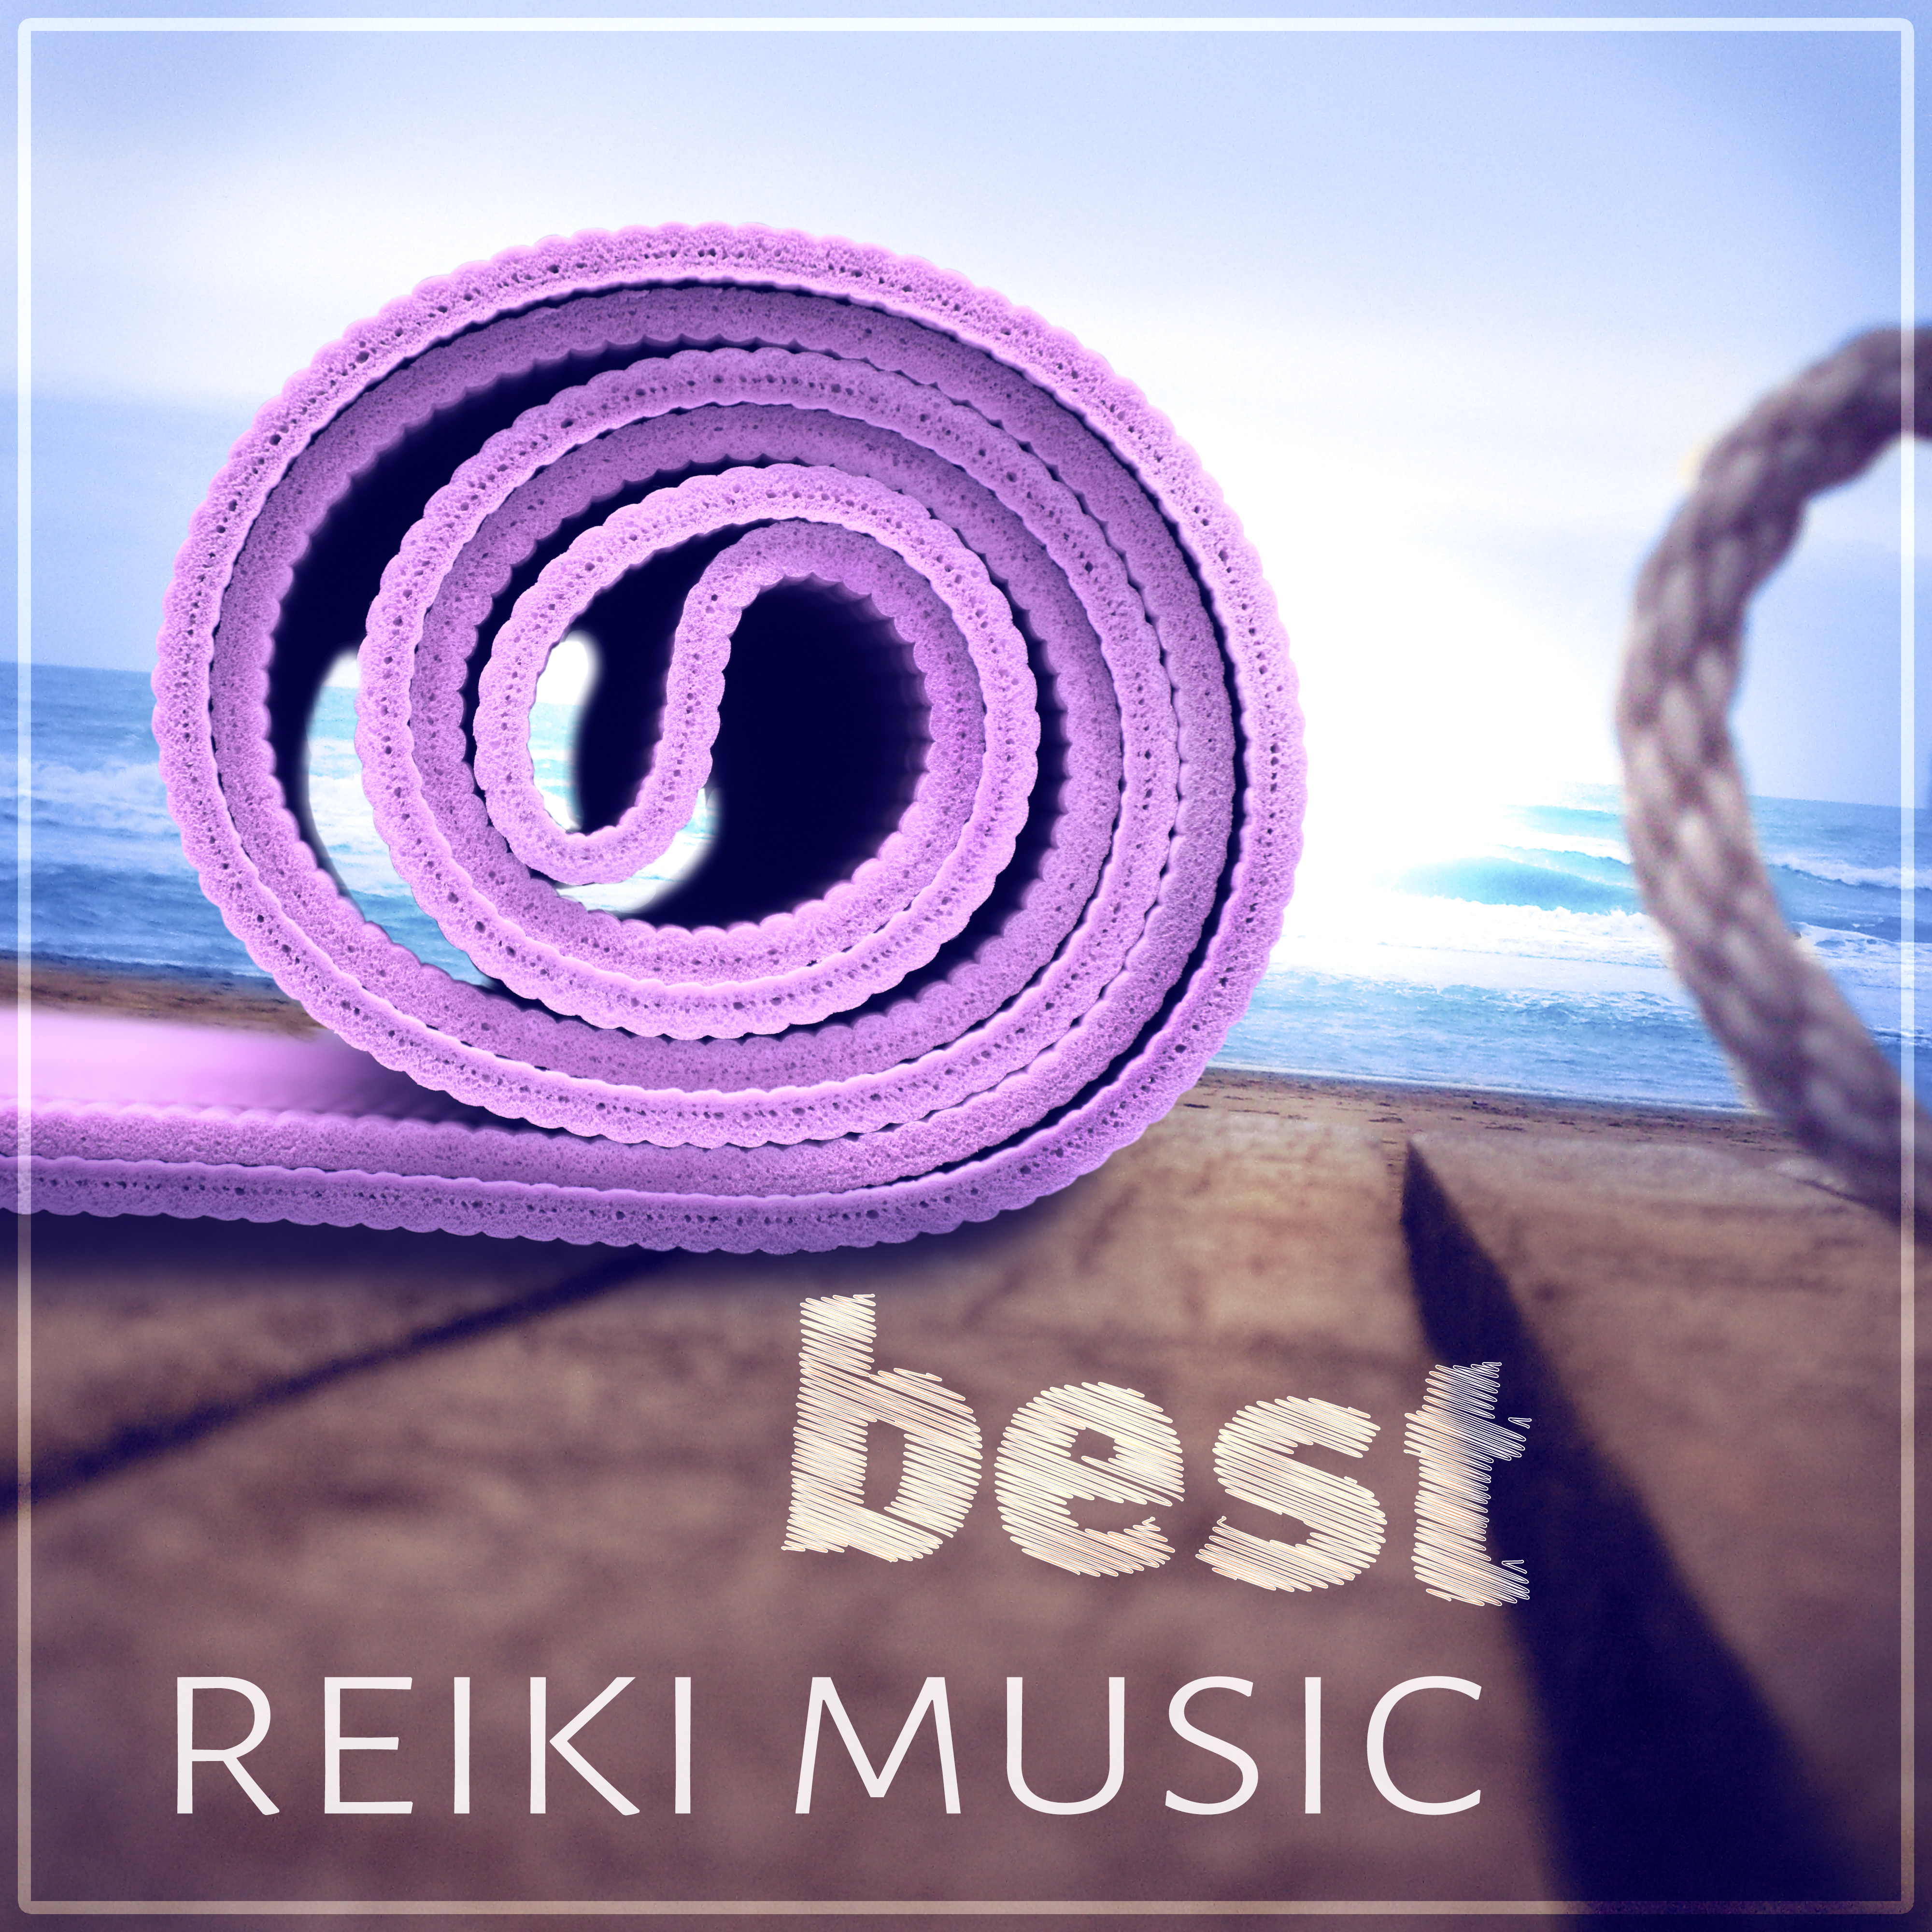 Best Reiki Music - Nature Pure Sounds, Healing and Inner Peace, Ultimate Wellness Center Sounds, Total Relaxation, Reiki, Relaxing Tracks Massage